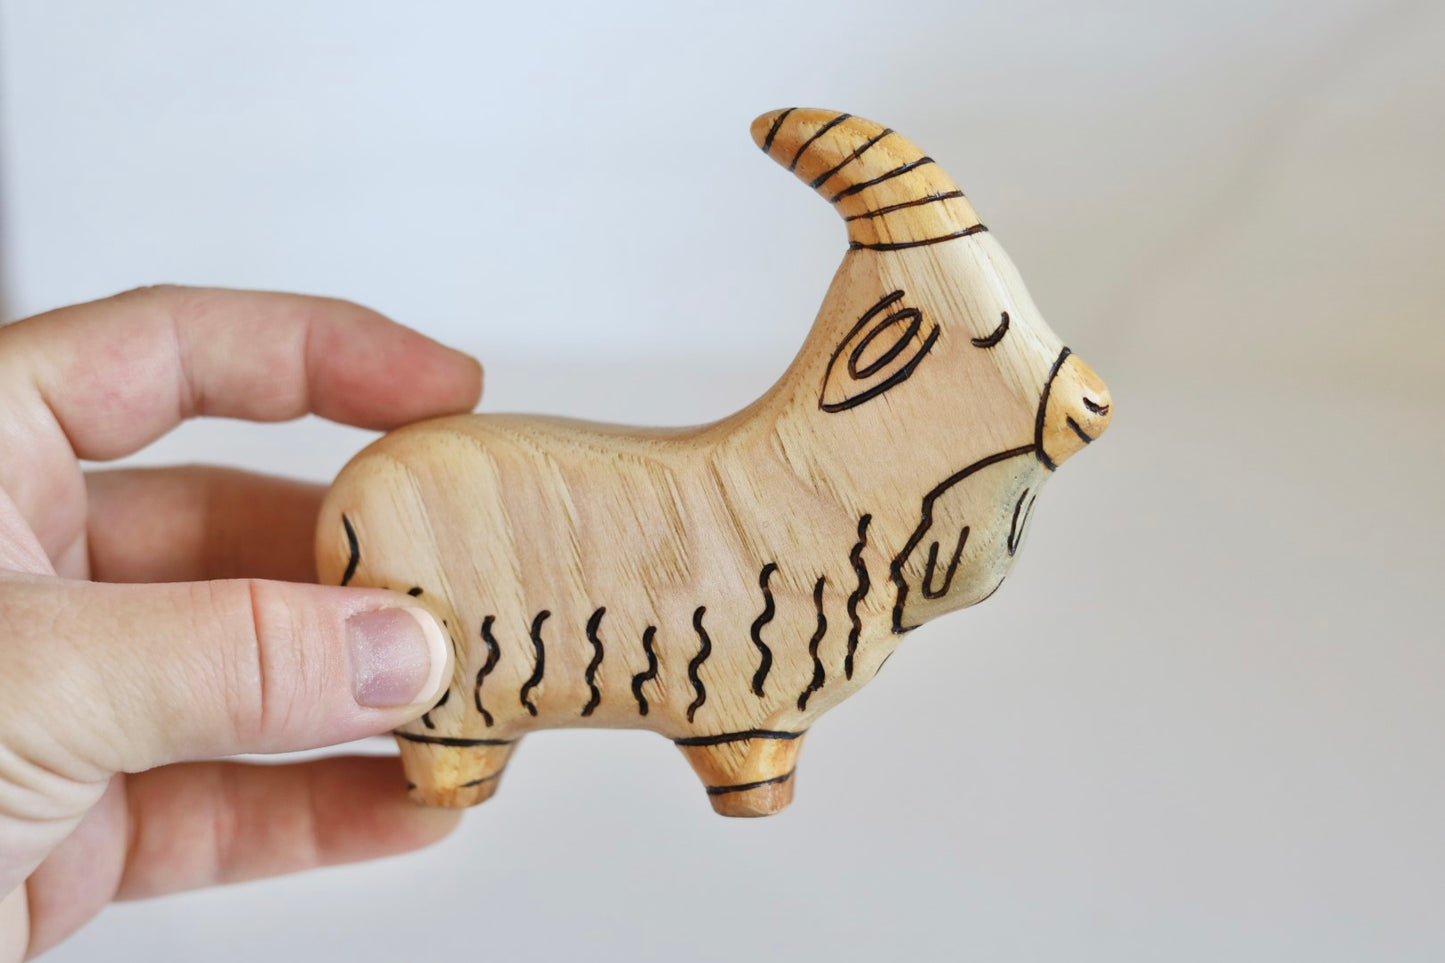 Wooden Bearded Goat Toy